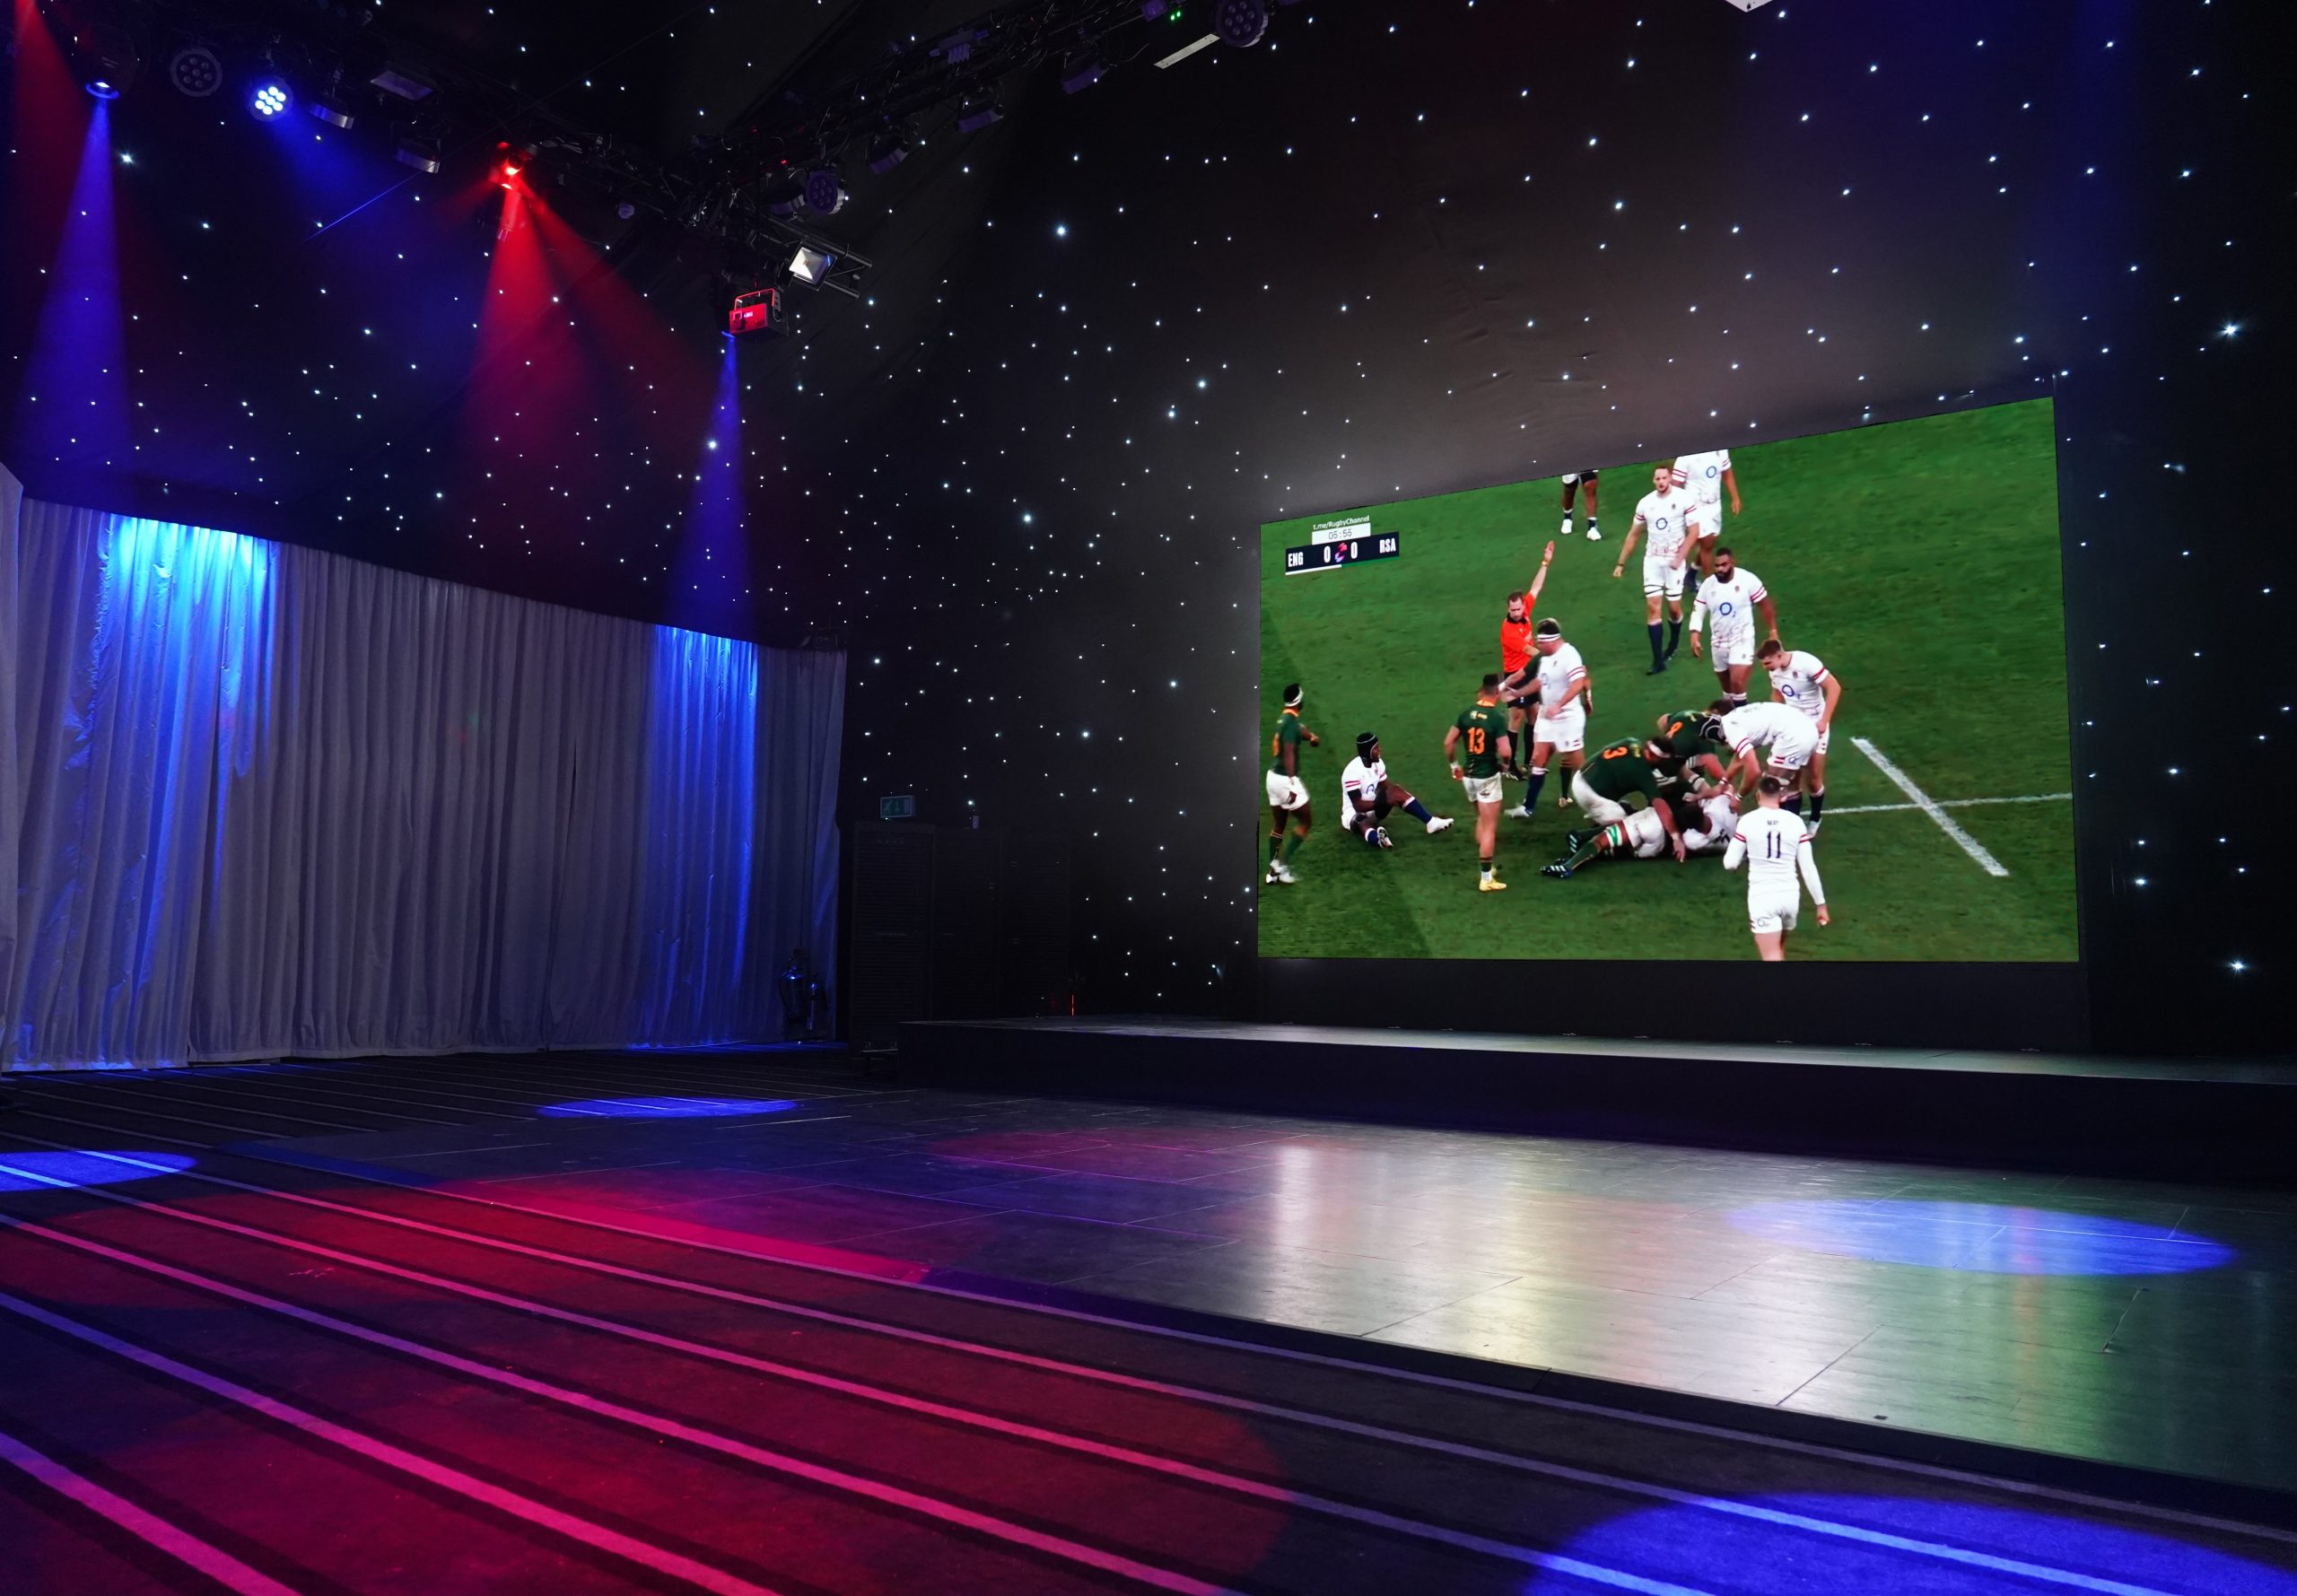 Introducing our brand new super-sized LED video wall